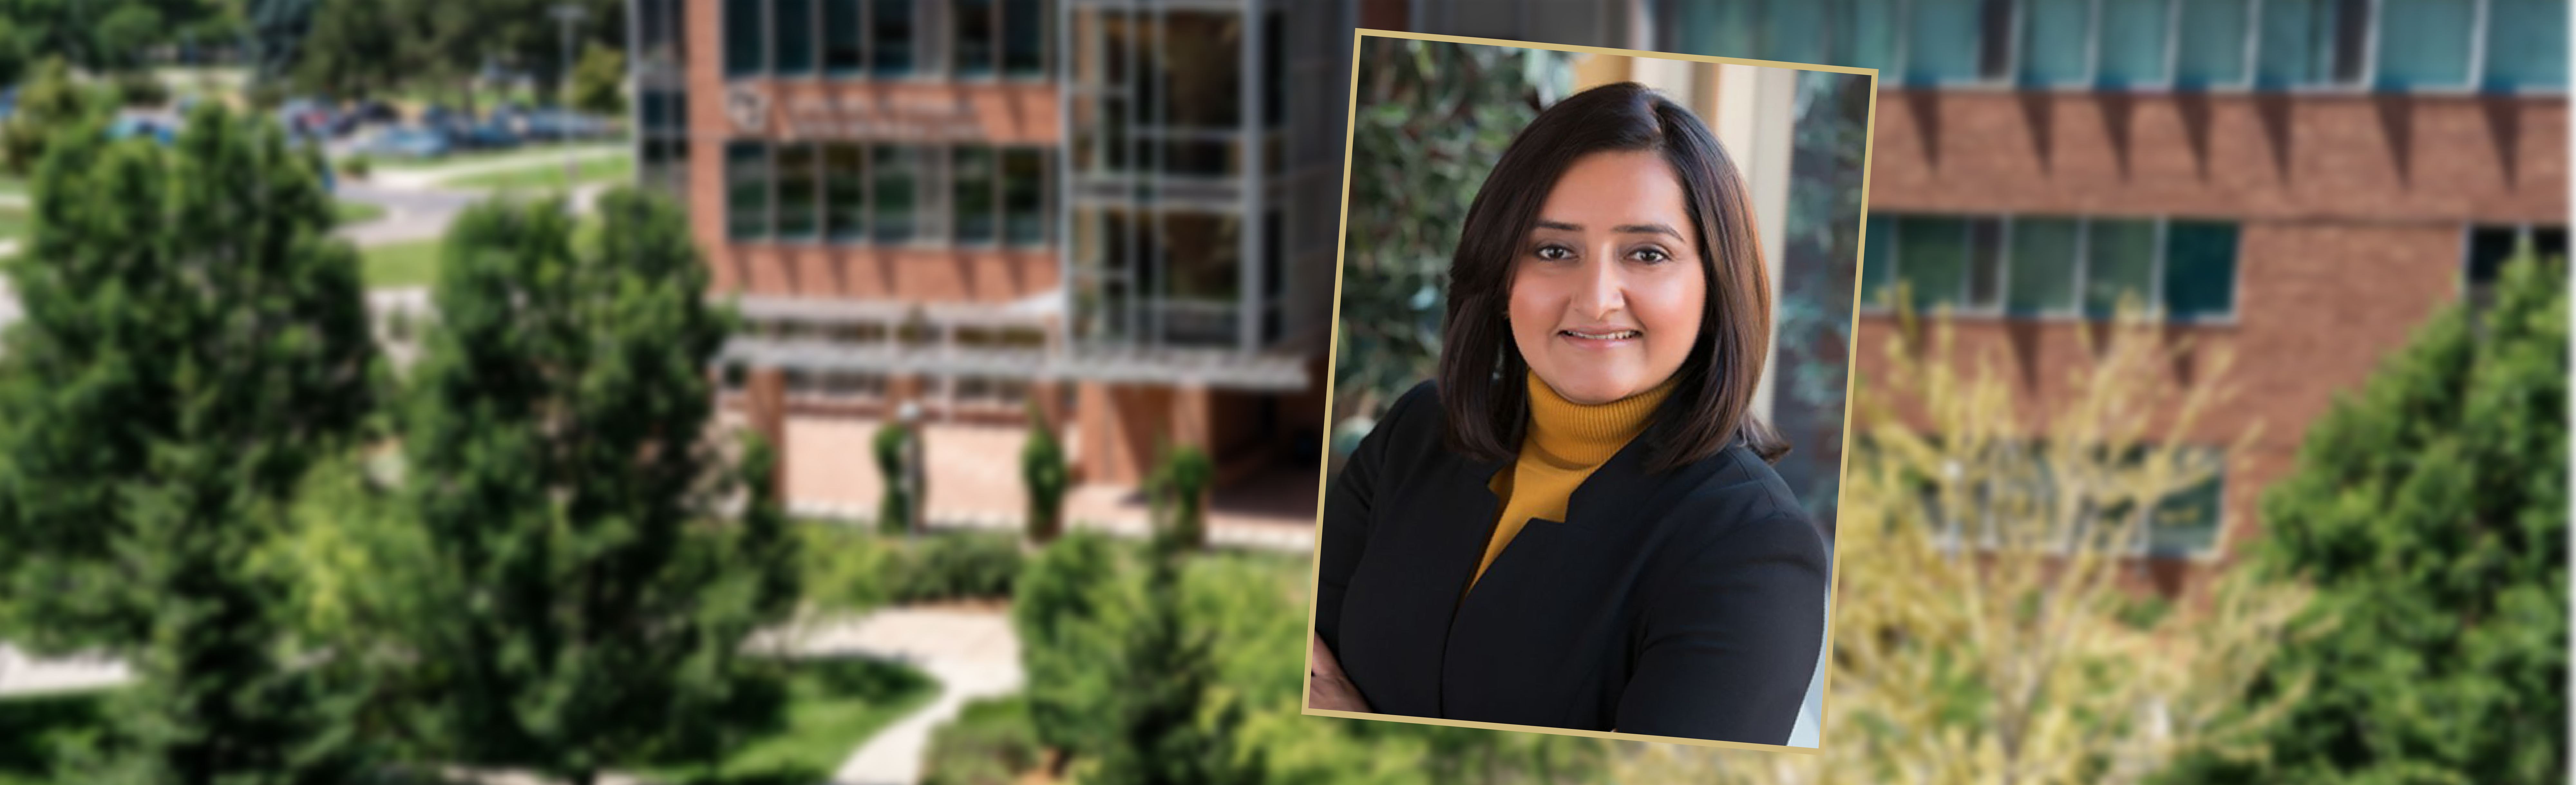 CU Faculty member, Tamanna Tiwari, DDS, MPH pictured in front of dental building exterior